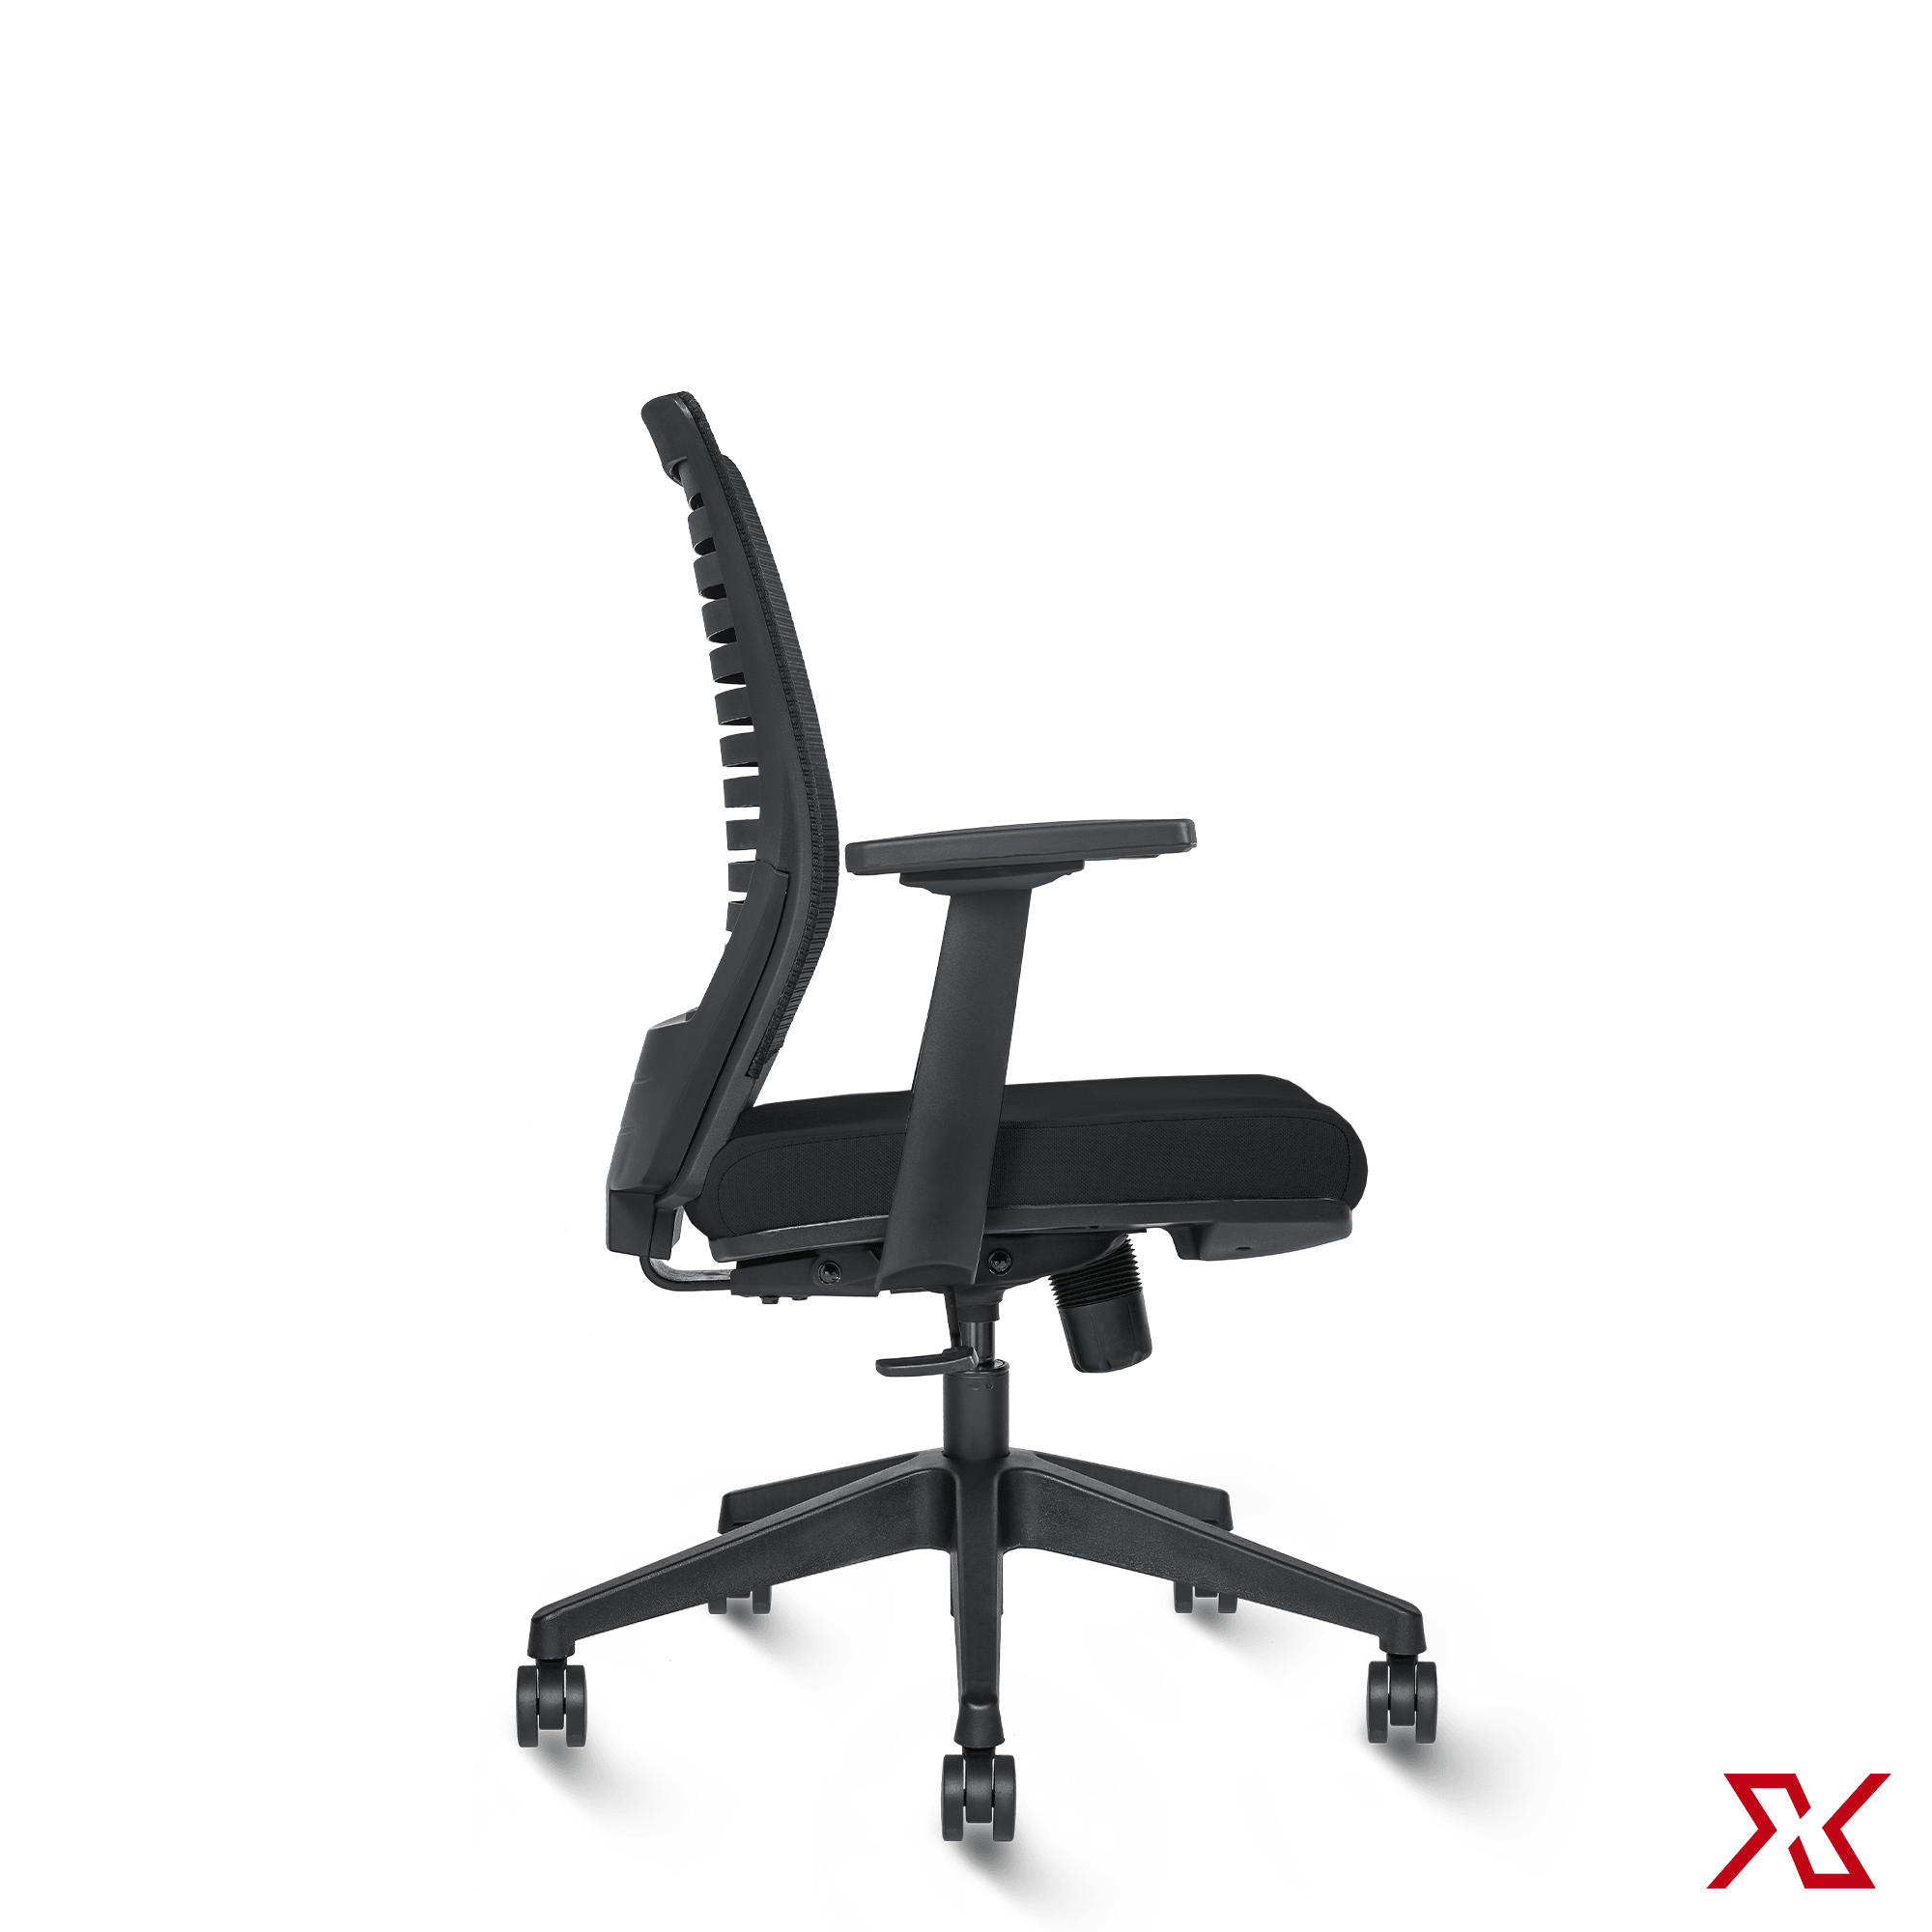 VINO Medium Back Fly All (Black Chair) - Exclusiff Seating Sytems